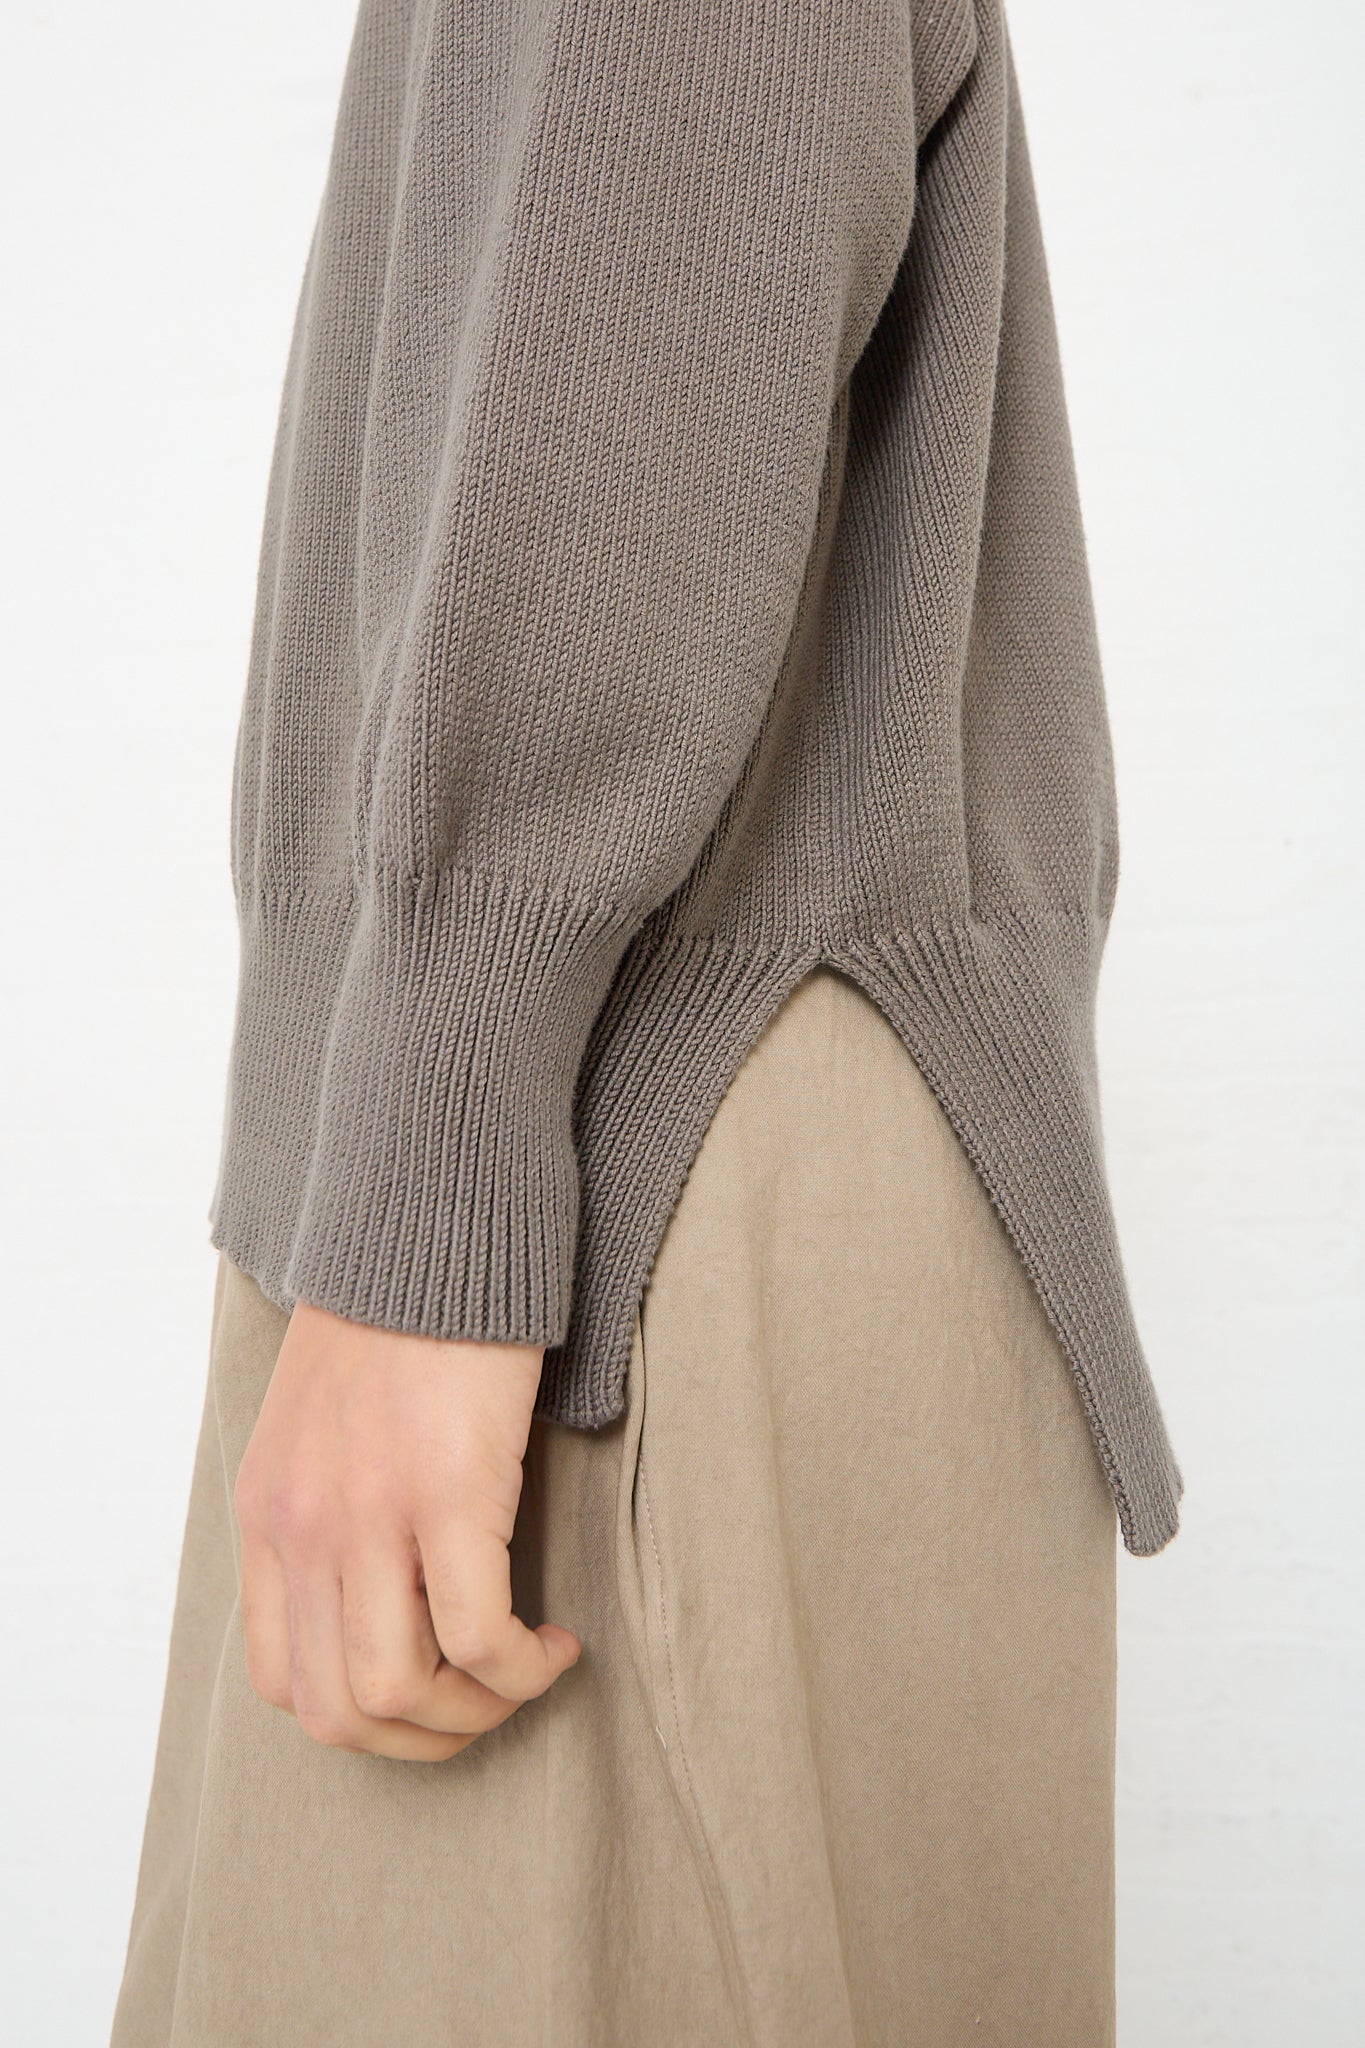 The side view of a woman wearing a Simple Crewneck in Rock (Olive Brown) by Lauren Manoogian and beige colored pants.